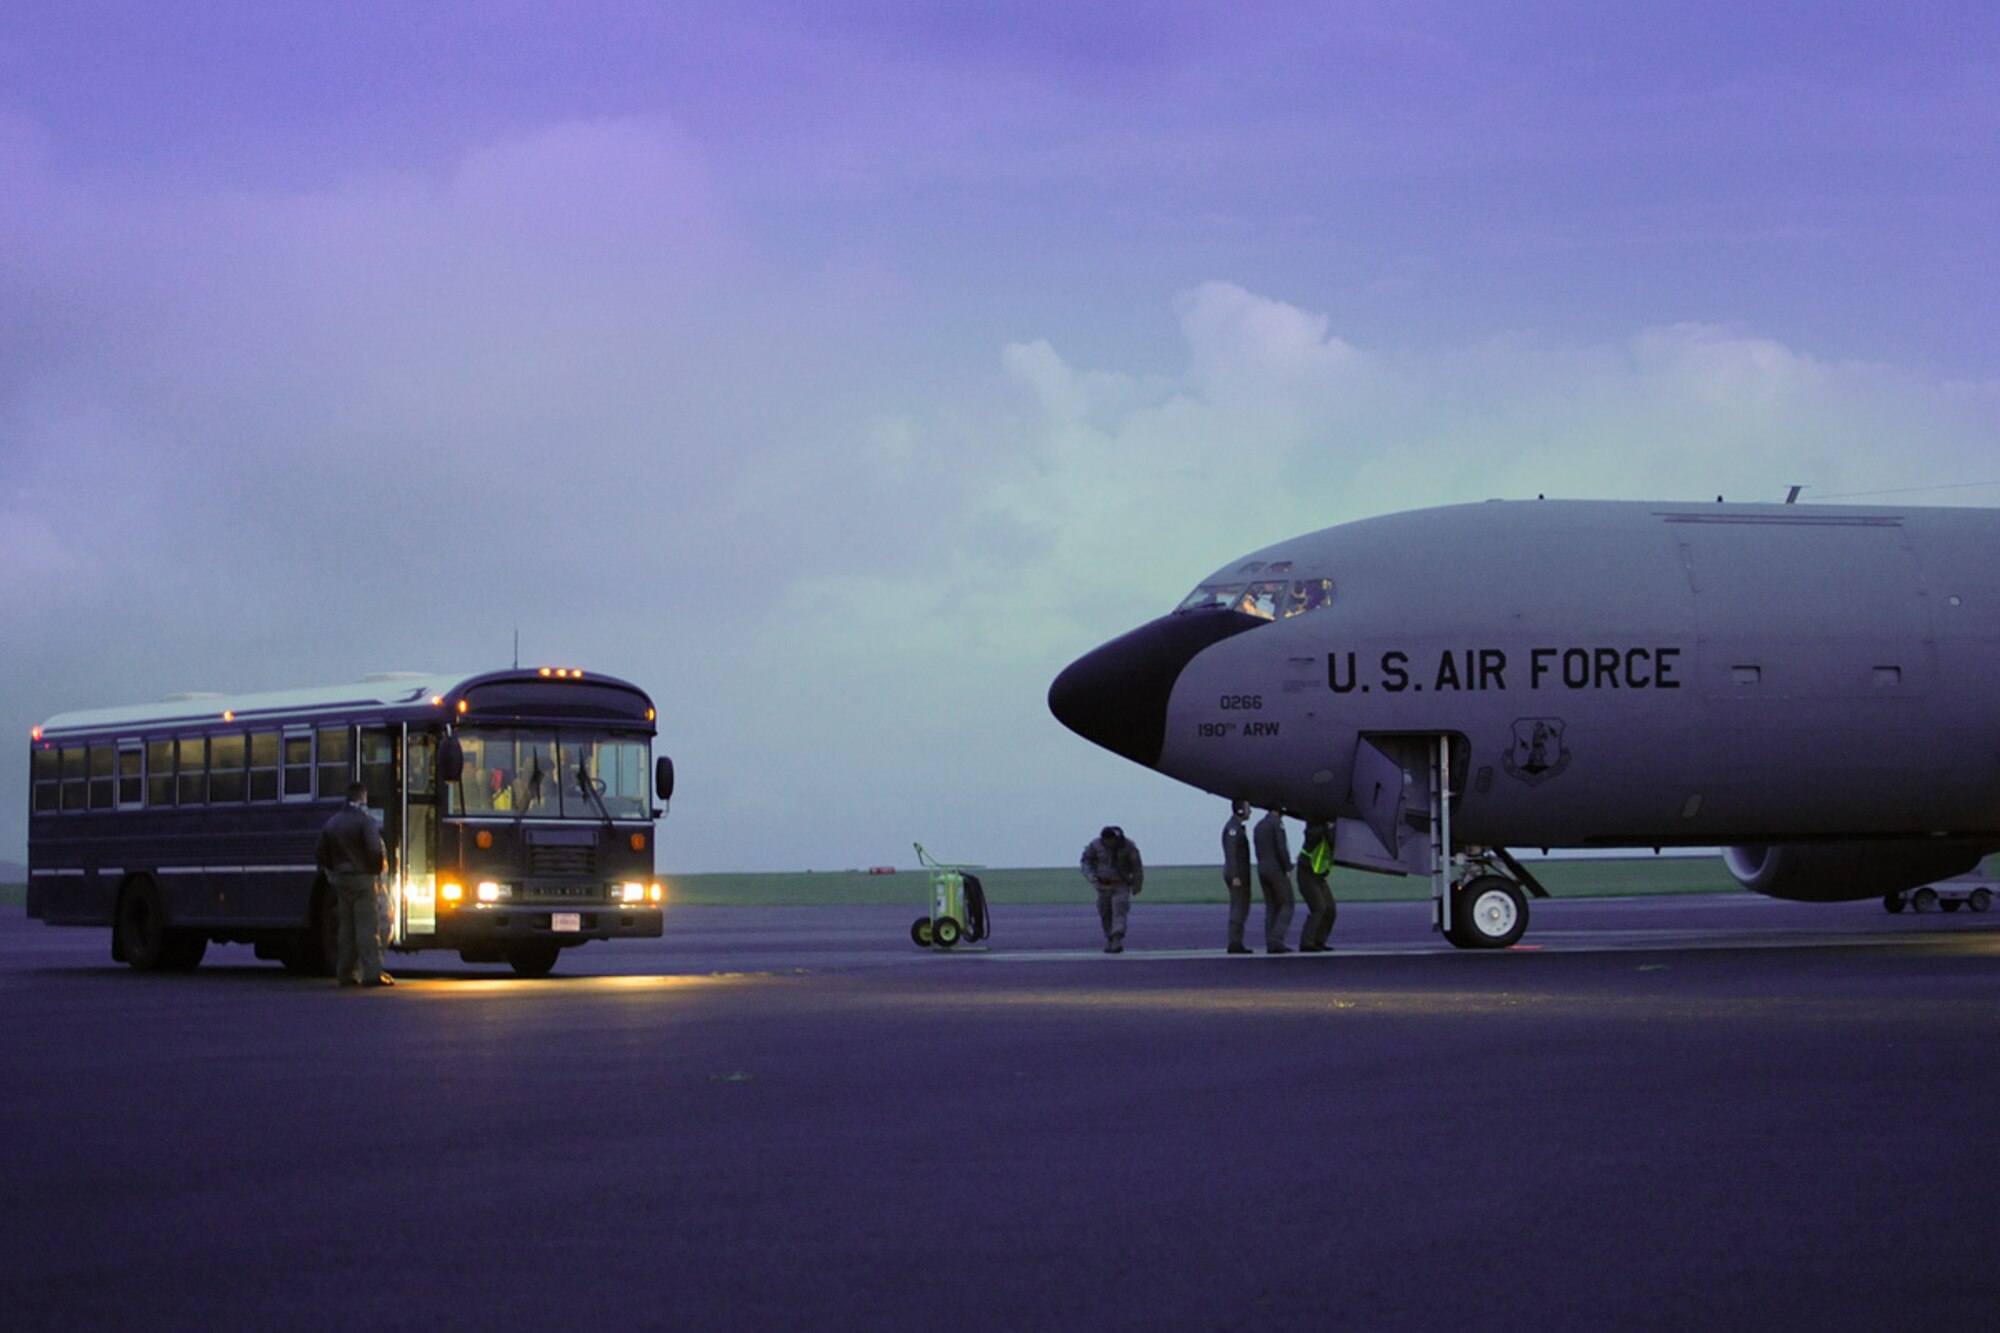 A detachment of Airmen from the 127th Civil Engineering Squadron, Michigan Air National Guard, wait on a bus prior to boarding a KC-135 Stratotanker in the early morning hours of April 8, 2010, at Lajes Field in the Azores Islands, Portugal. The Airmen were awaiting transportation to Accra, Ghana, for a two-week deployment. (U.S. Air Force photo by MSgt. Terry Atwell)